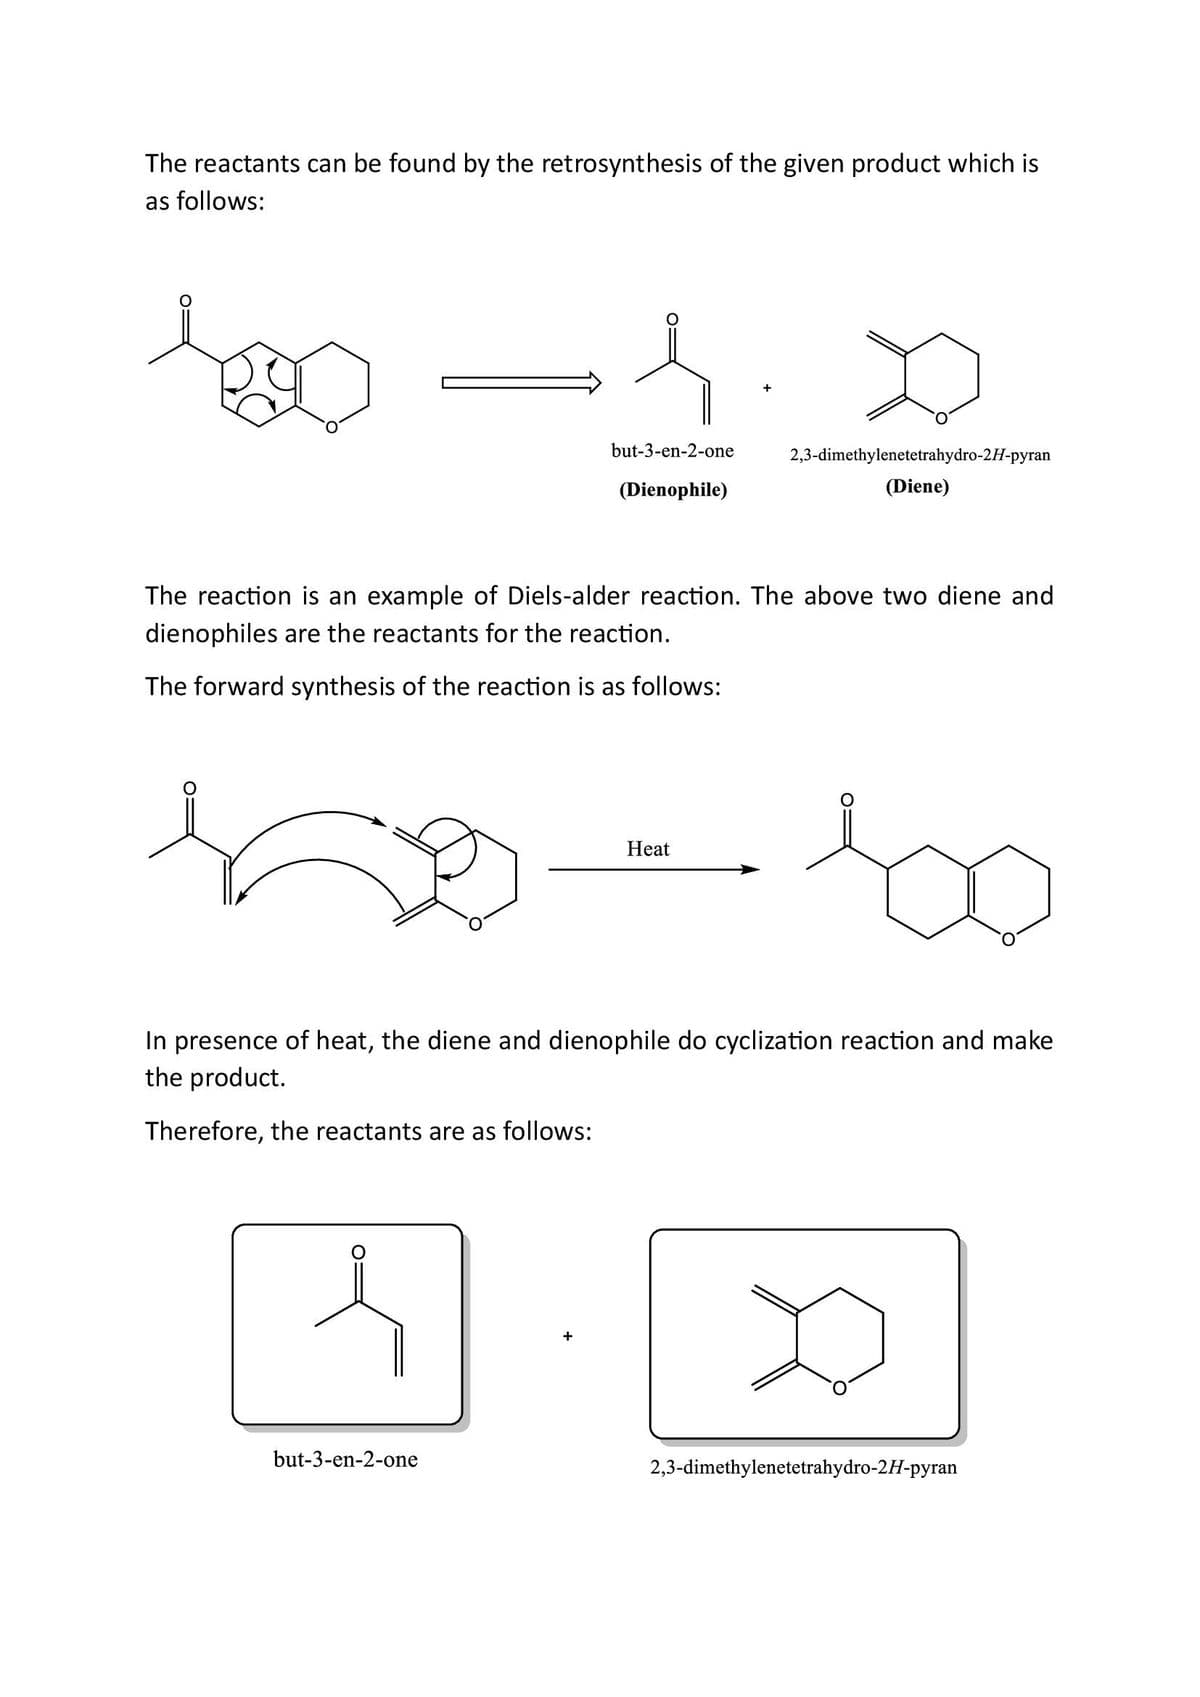 The reactants can be found by the retrosynthesis of the given product which is
as follows:
130 -1.0
but-3-en-2-one
(Dienophile)
2,3-dimethylenetetrahydro-2H-pyran
(Diene)
The reaction is an example of Diels-alder reaction. The above two diene and
dienophiles are the reactants for the reaction.
The forward synthesis of the reaction is as follows:
Heat
In presence of heat, the diene and dienophile do cyclization reaction and make
the product.
Therefore, the reactants are as follows:
but-3-en-2-one
2,3-dimethylenetetrahydro-2H-pyran